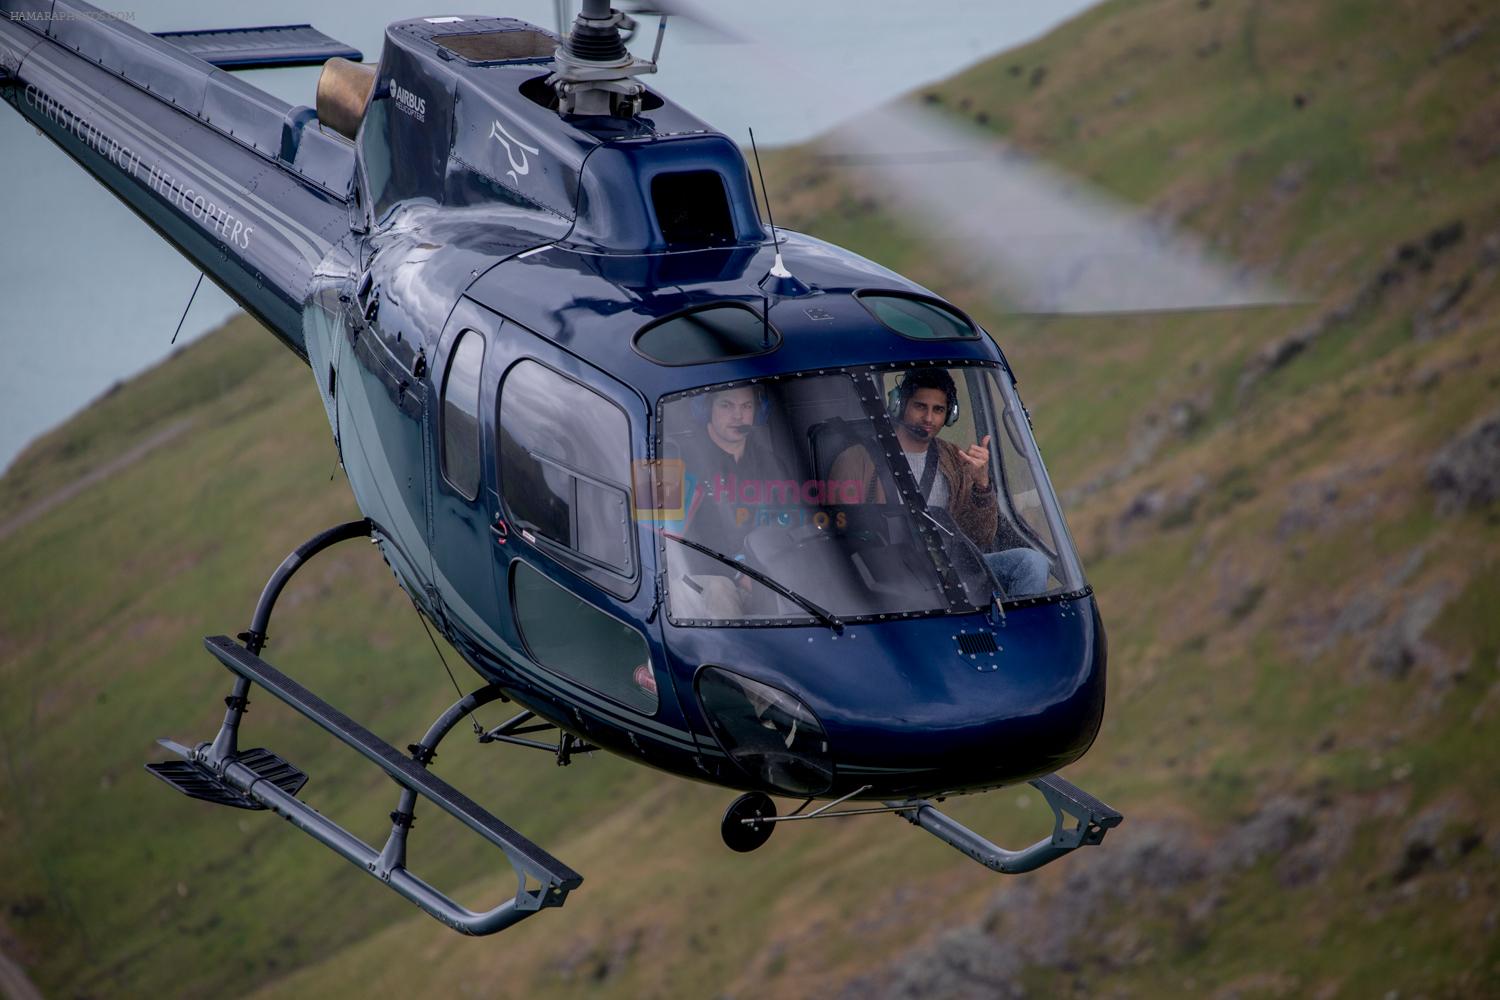 Sidharth's helicopter ride with Richie McCaw, former All Blacks captain ...